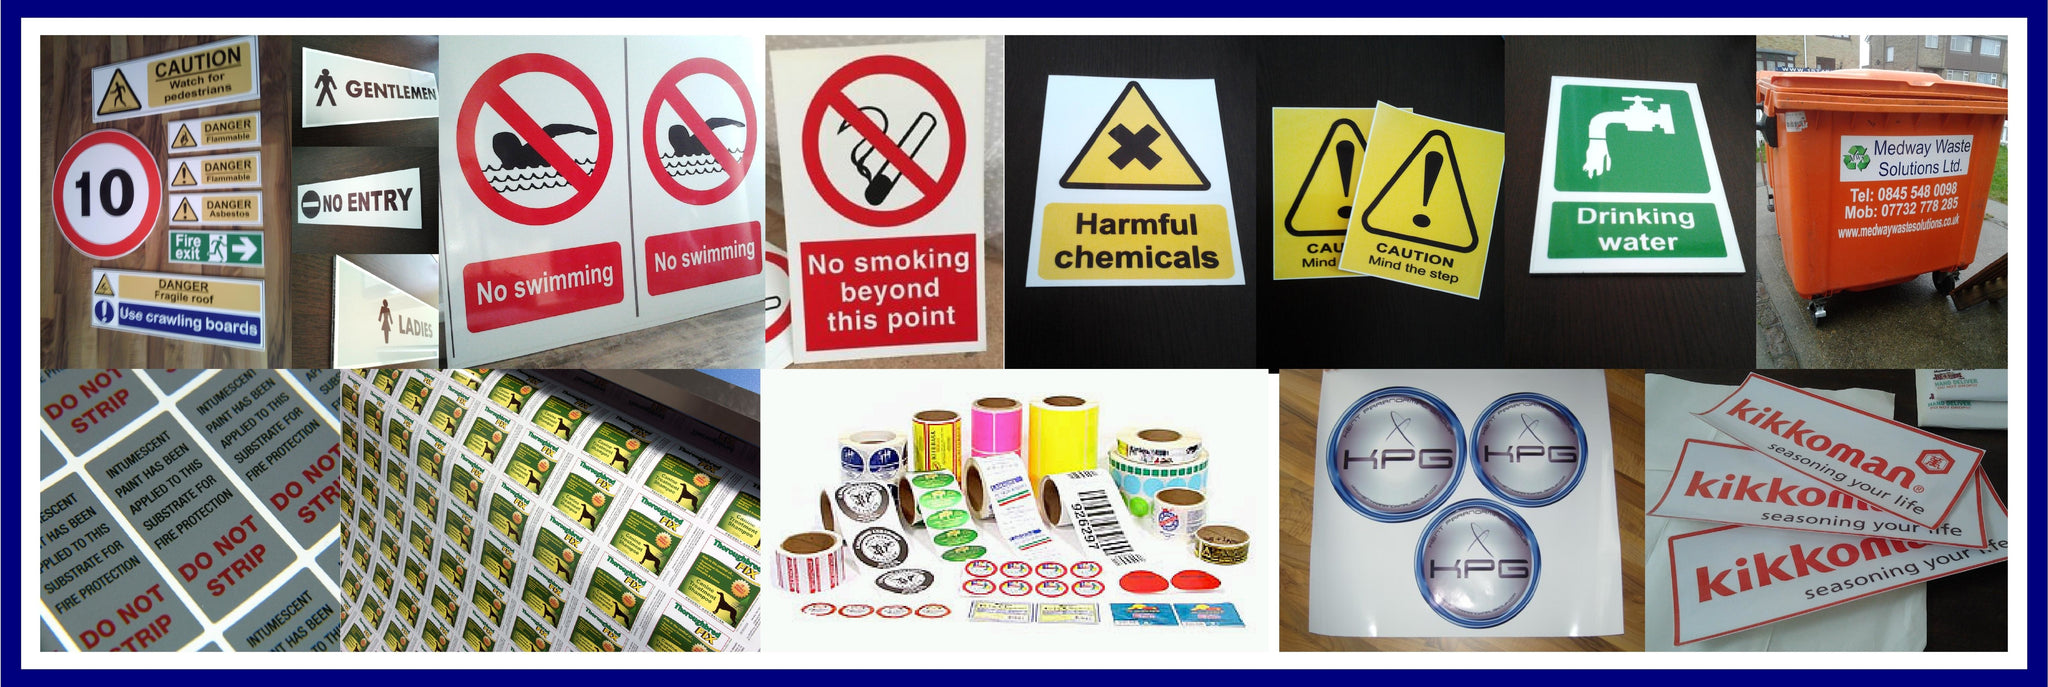 1st 4 Signs Health and Safety Signs